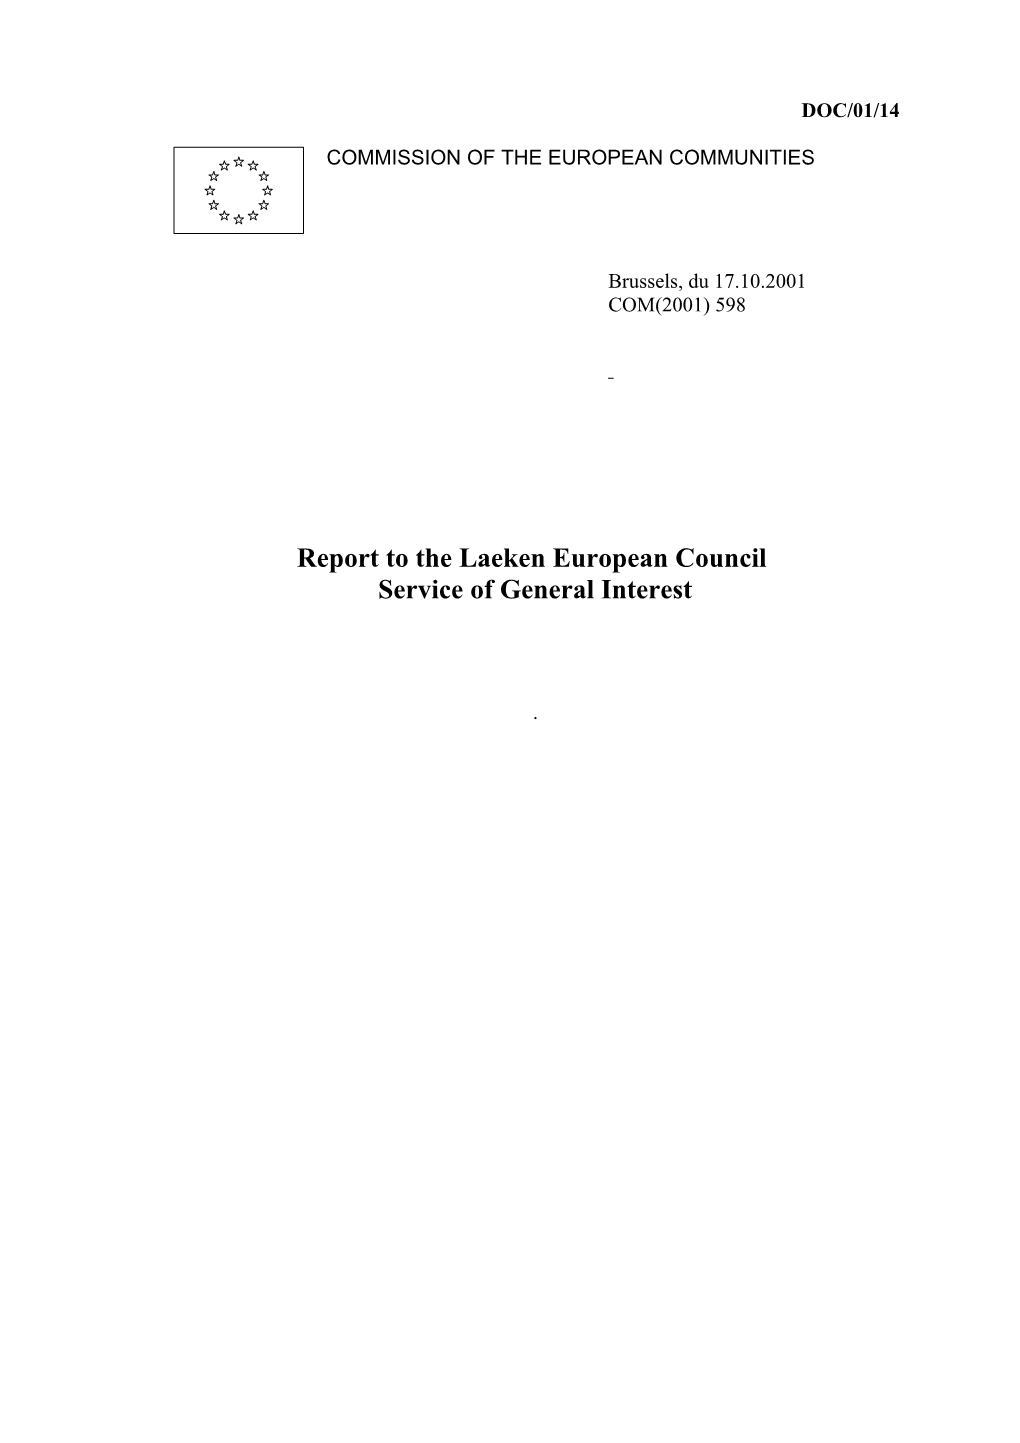 Report to the Laeken European Council Service of General Interest